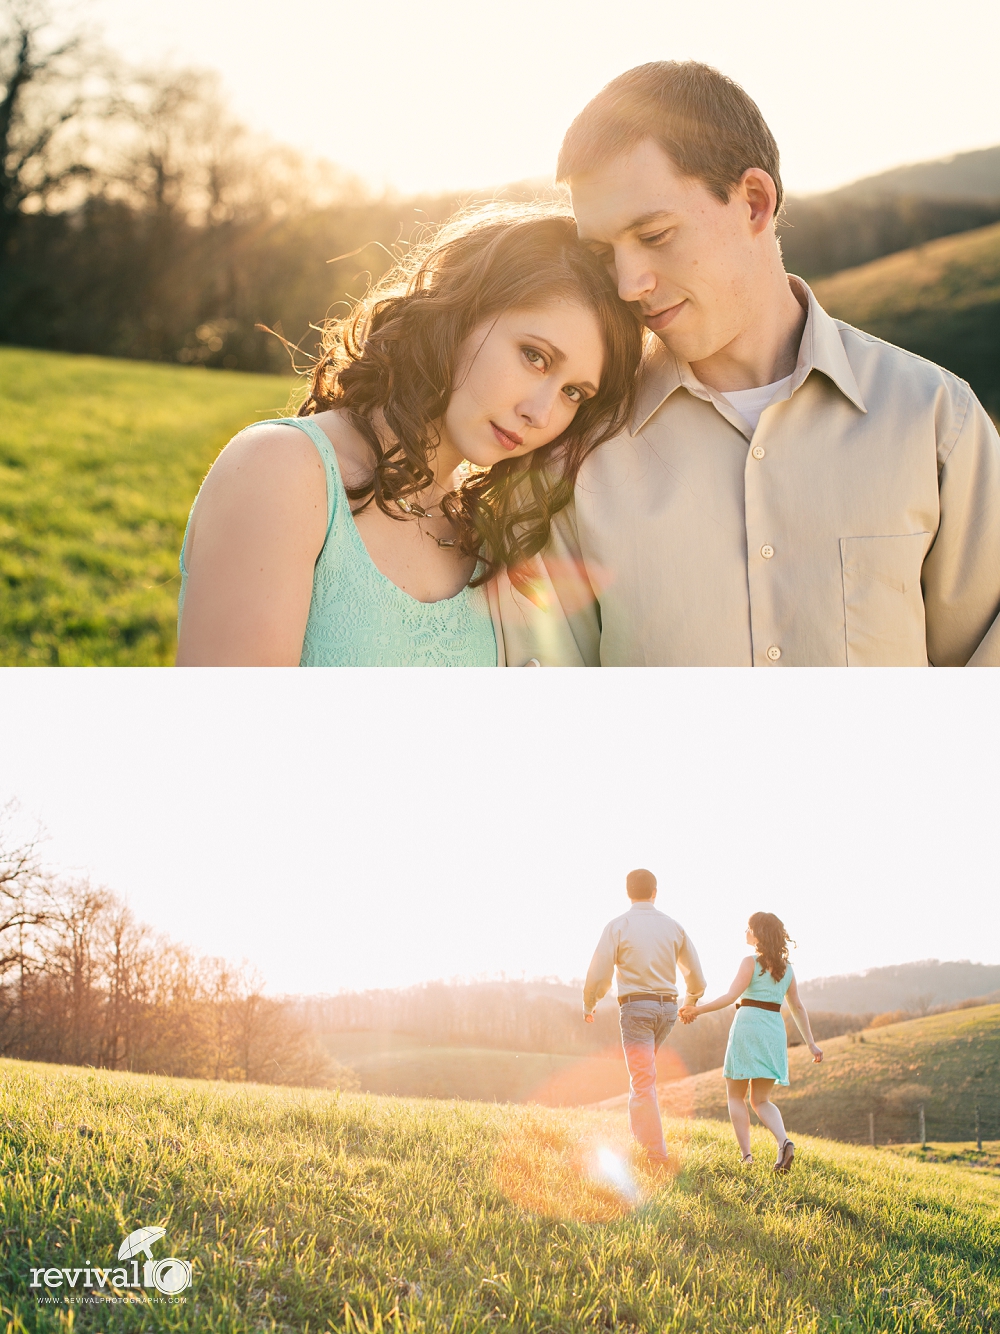 5 Tips for Your Engagement Session Photos by Revival Photography www.revivalphotography.com/blog